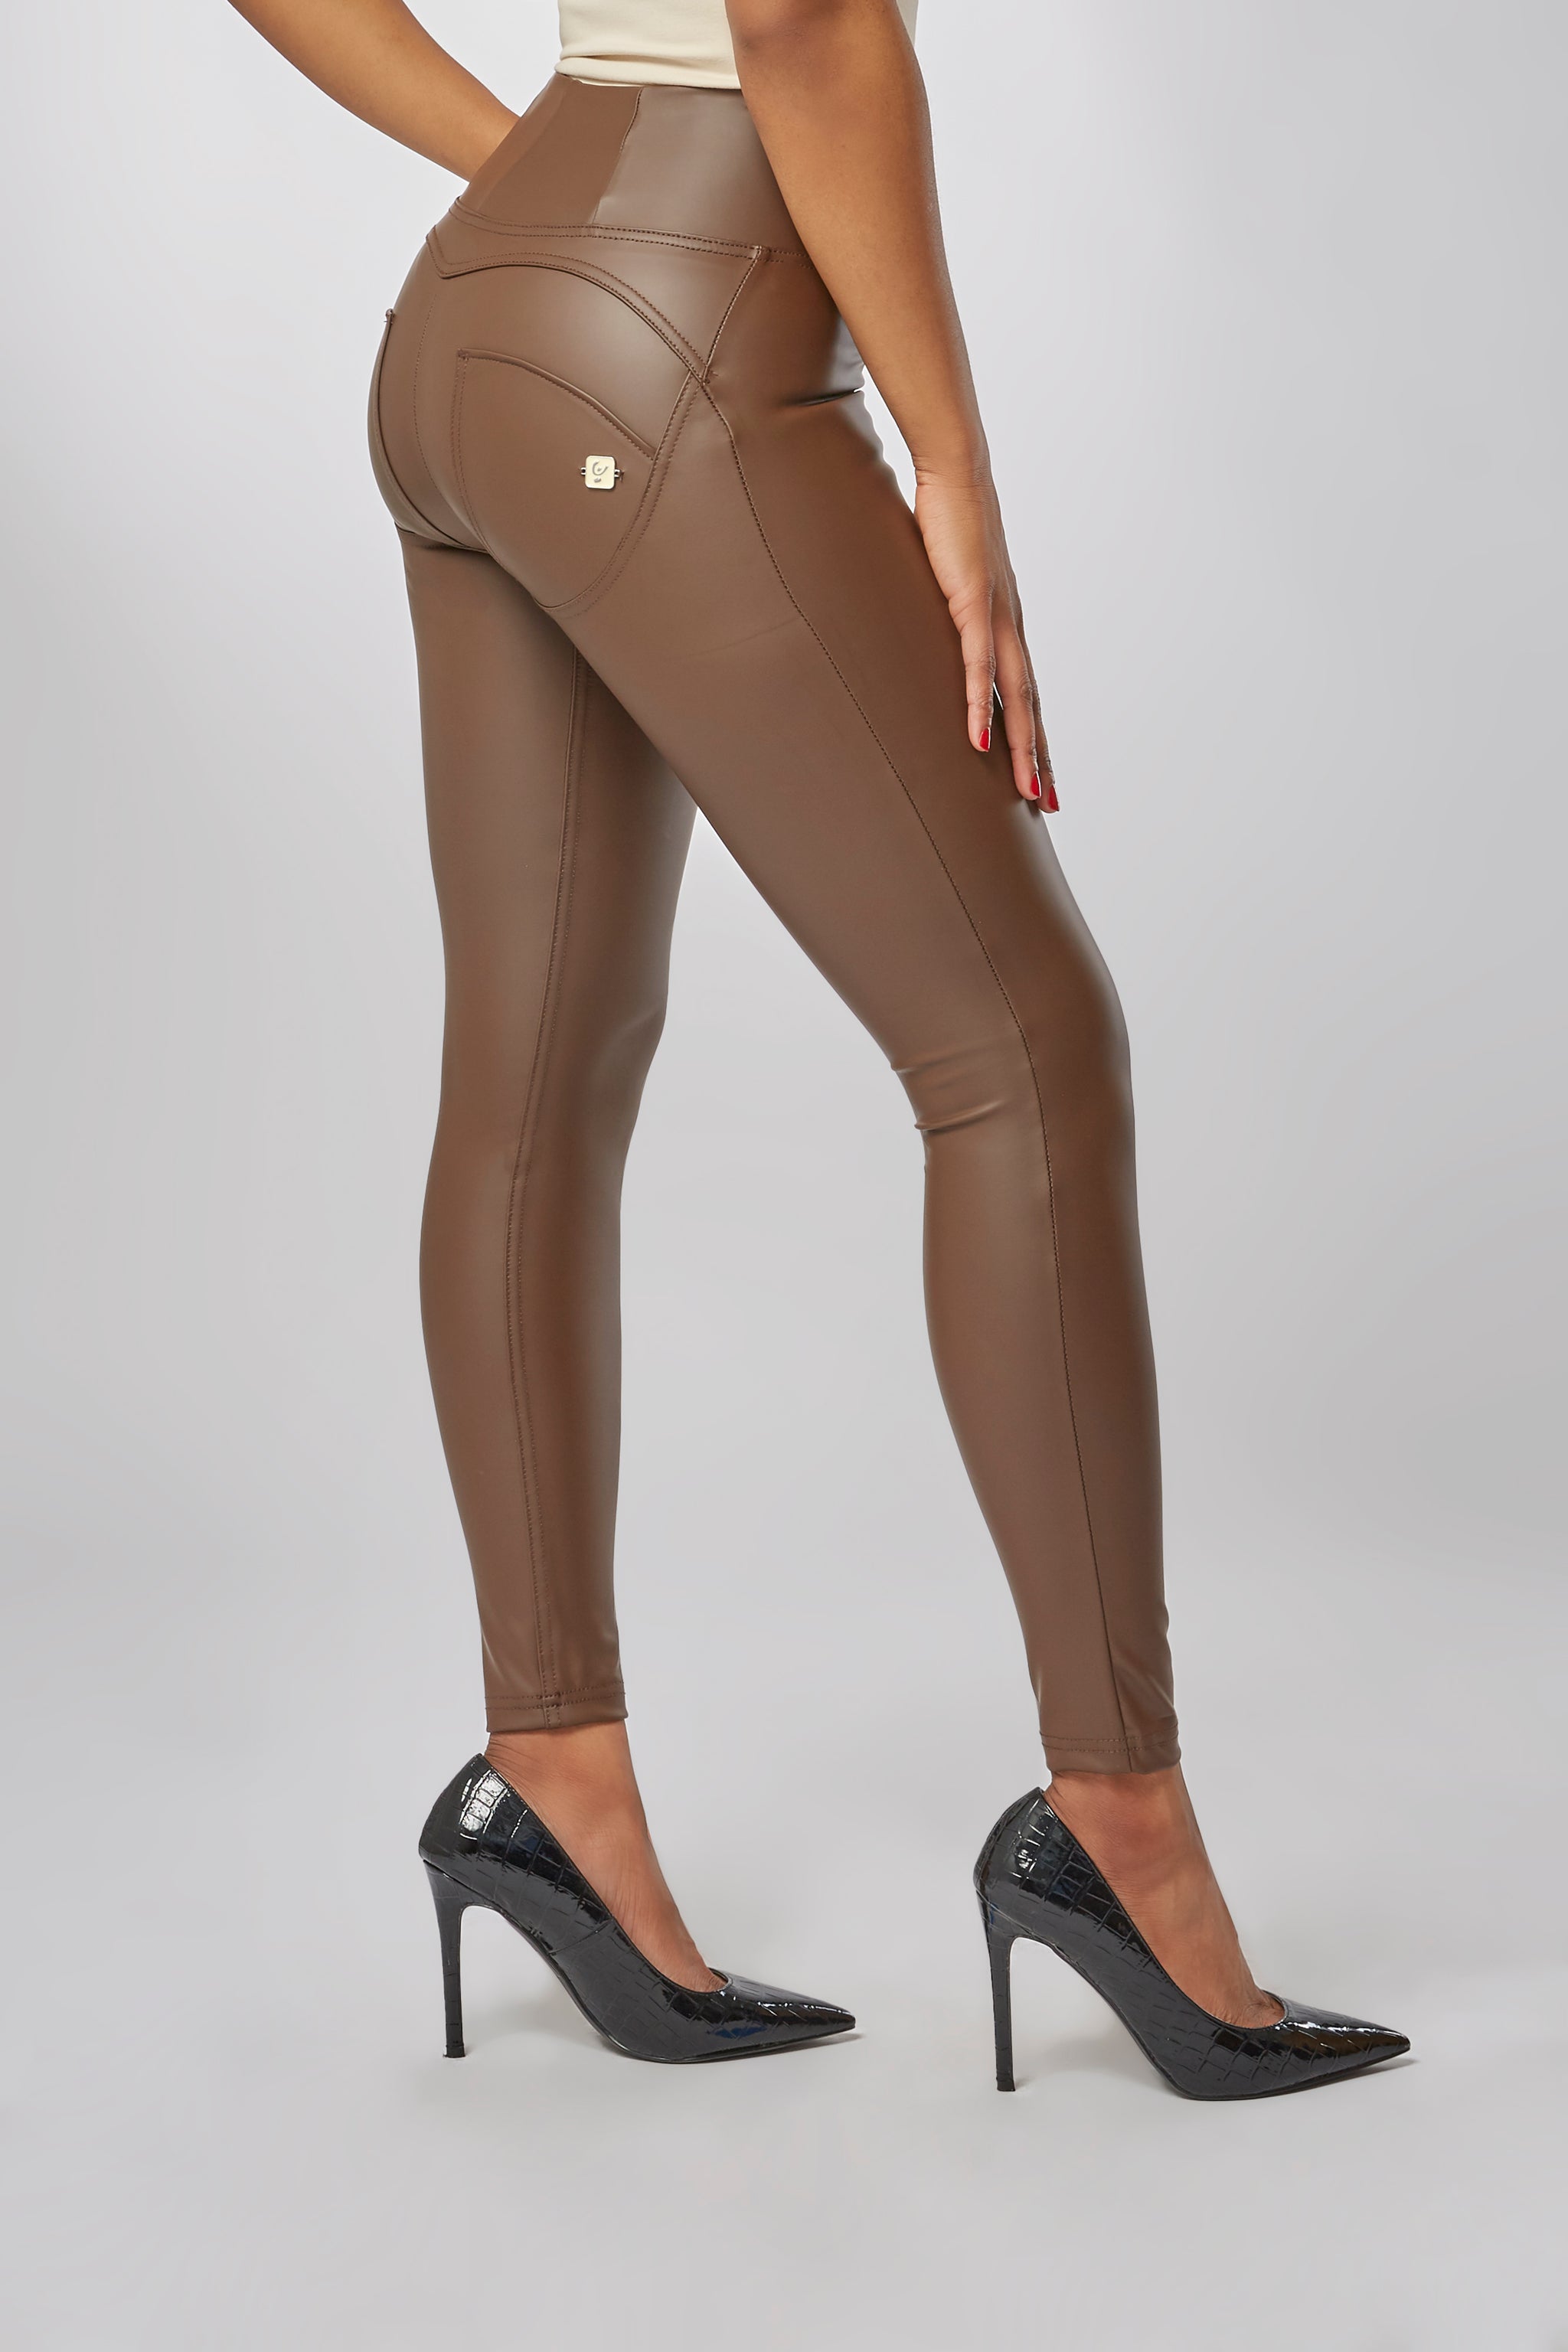 Women's Faux Leather Leggings - A New Day™ Dark Brown XL  Faux leather  leggings, Leather leggings, Womens faux leather